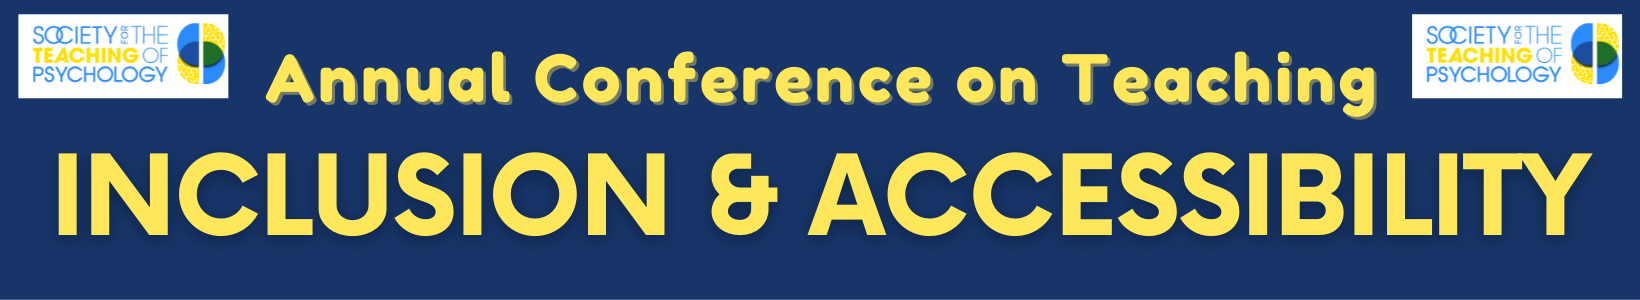 Annual Conference on Teaching Inclusion and Accessibility